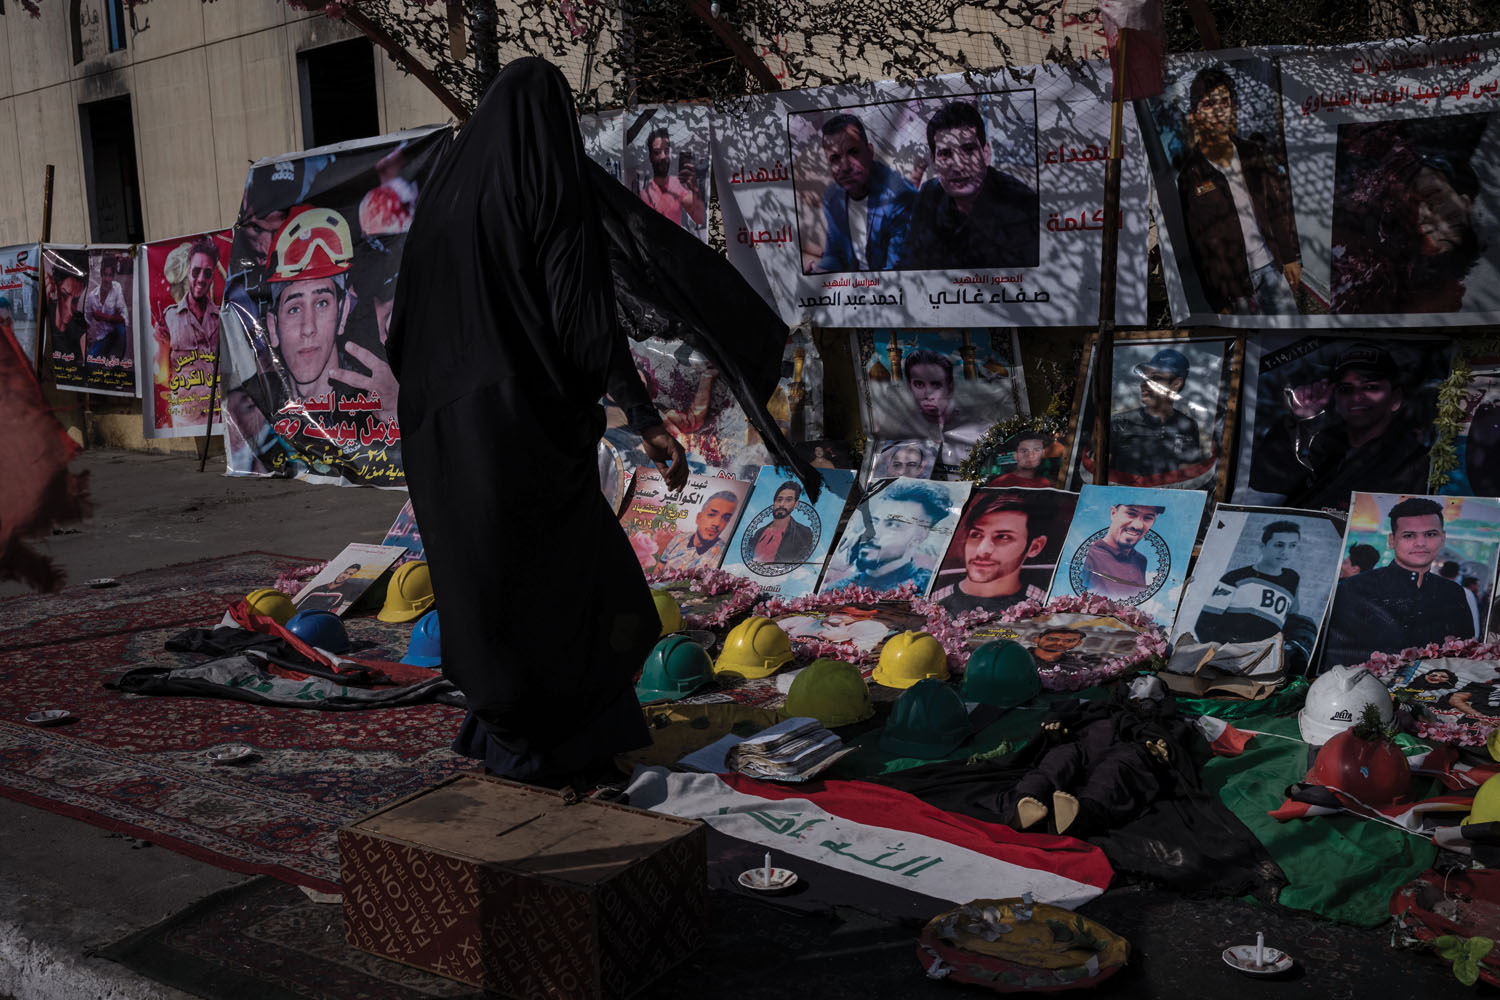 A woman offers prayers amid a makeshift shrine to those who've died during the protests.